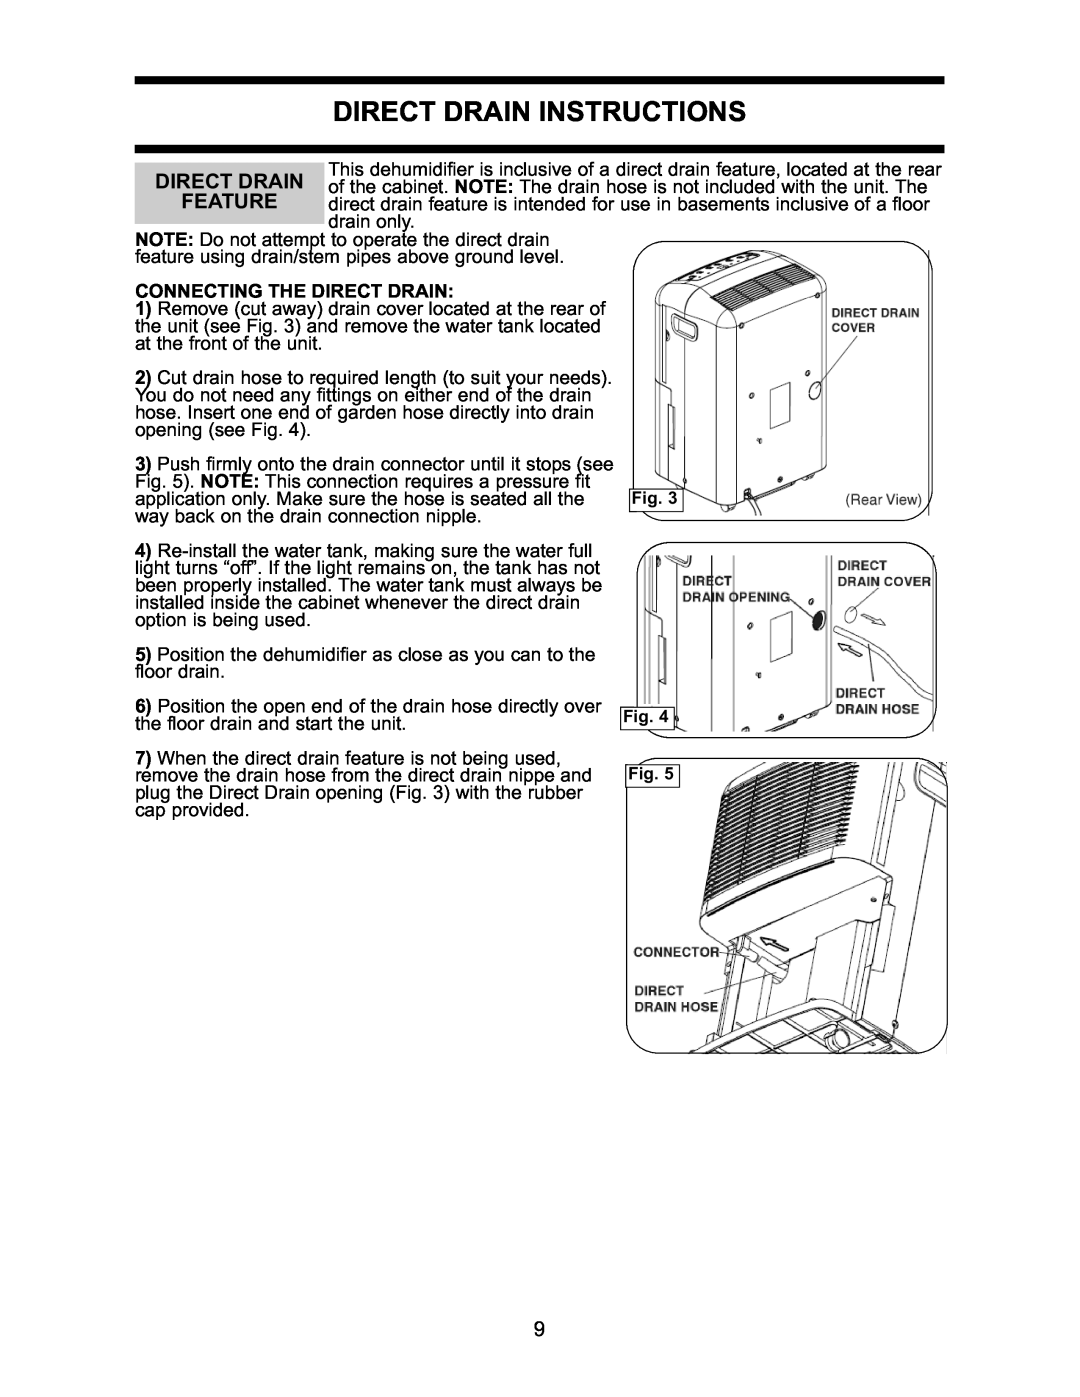 Danby DDR2509EE manual Direct Drain Instructions, Connecting The Direct Drain 